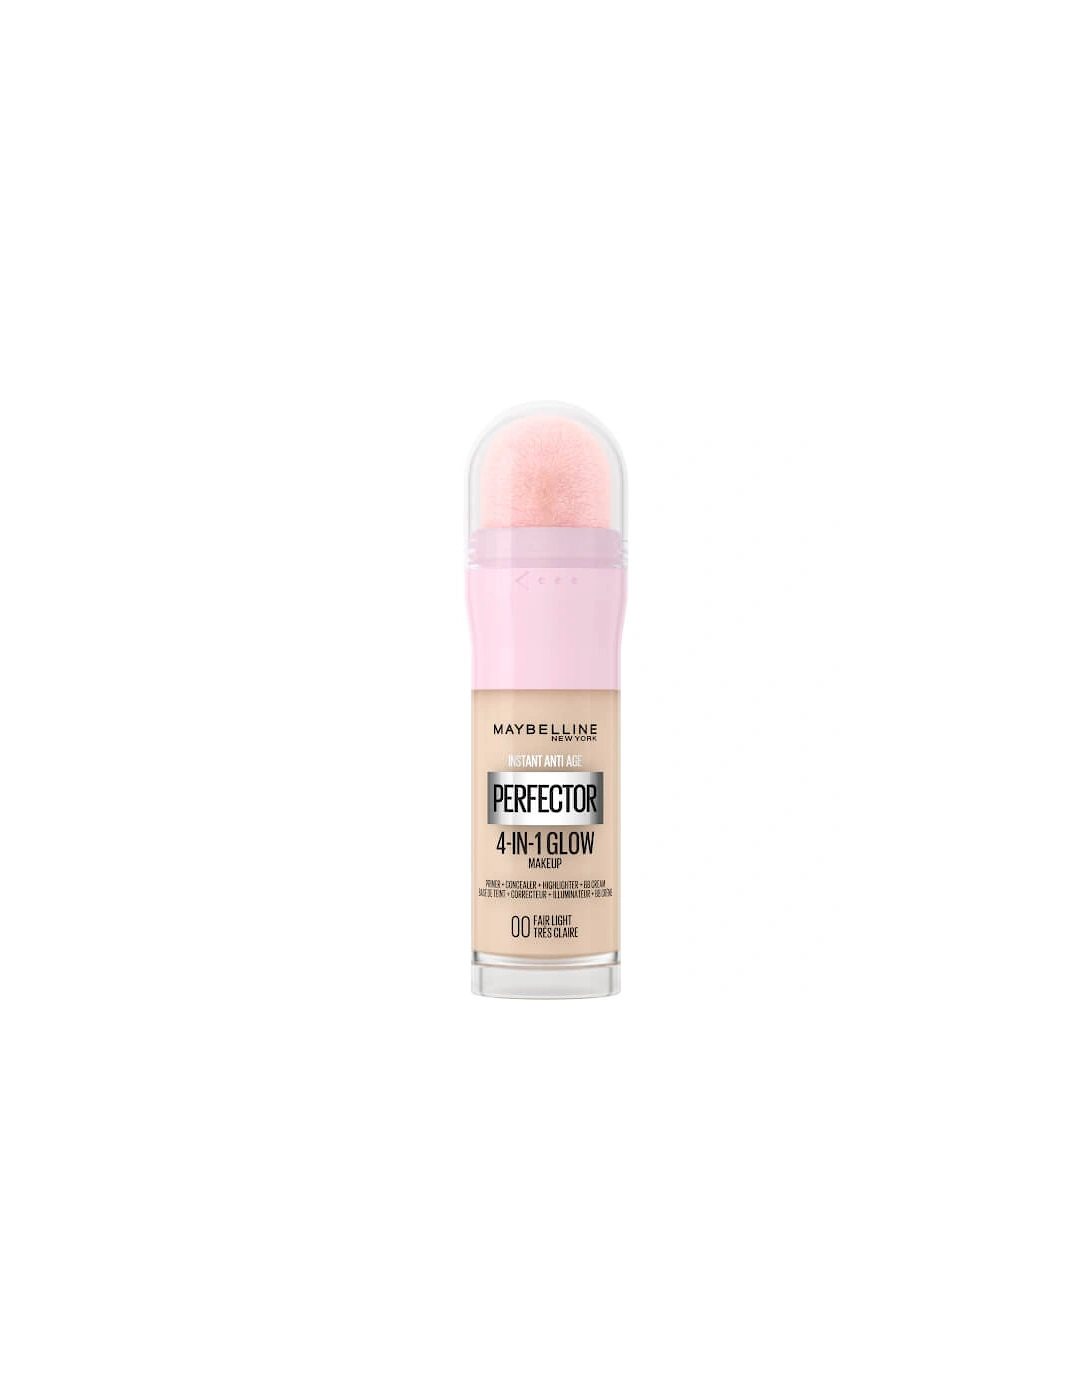 Instant Anti Age Perfector 4-in-1 Glow Primer, Concealer and Highlighter 118ml - Fair Light, 2 of 1